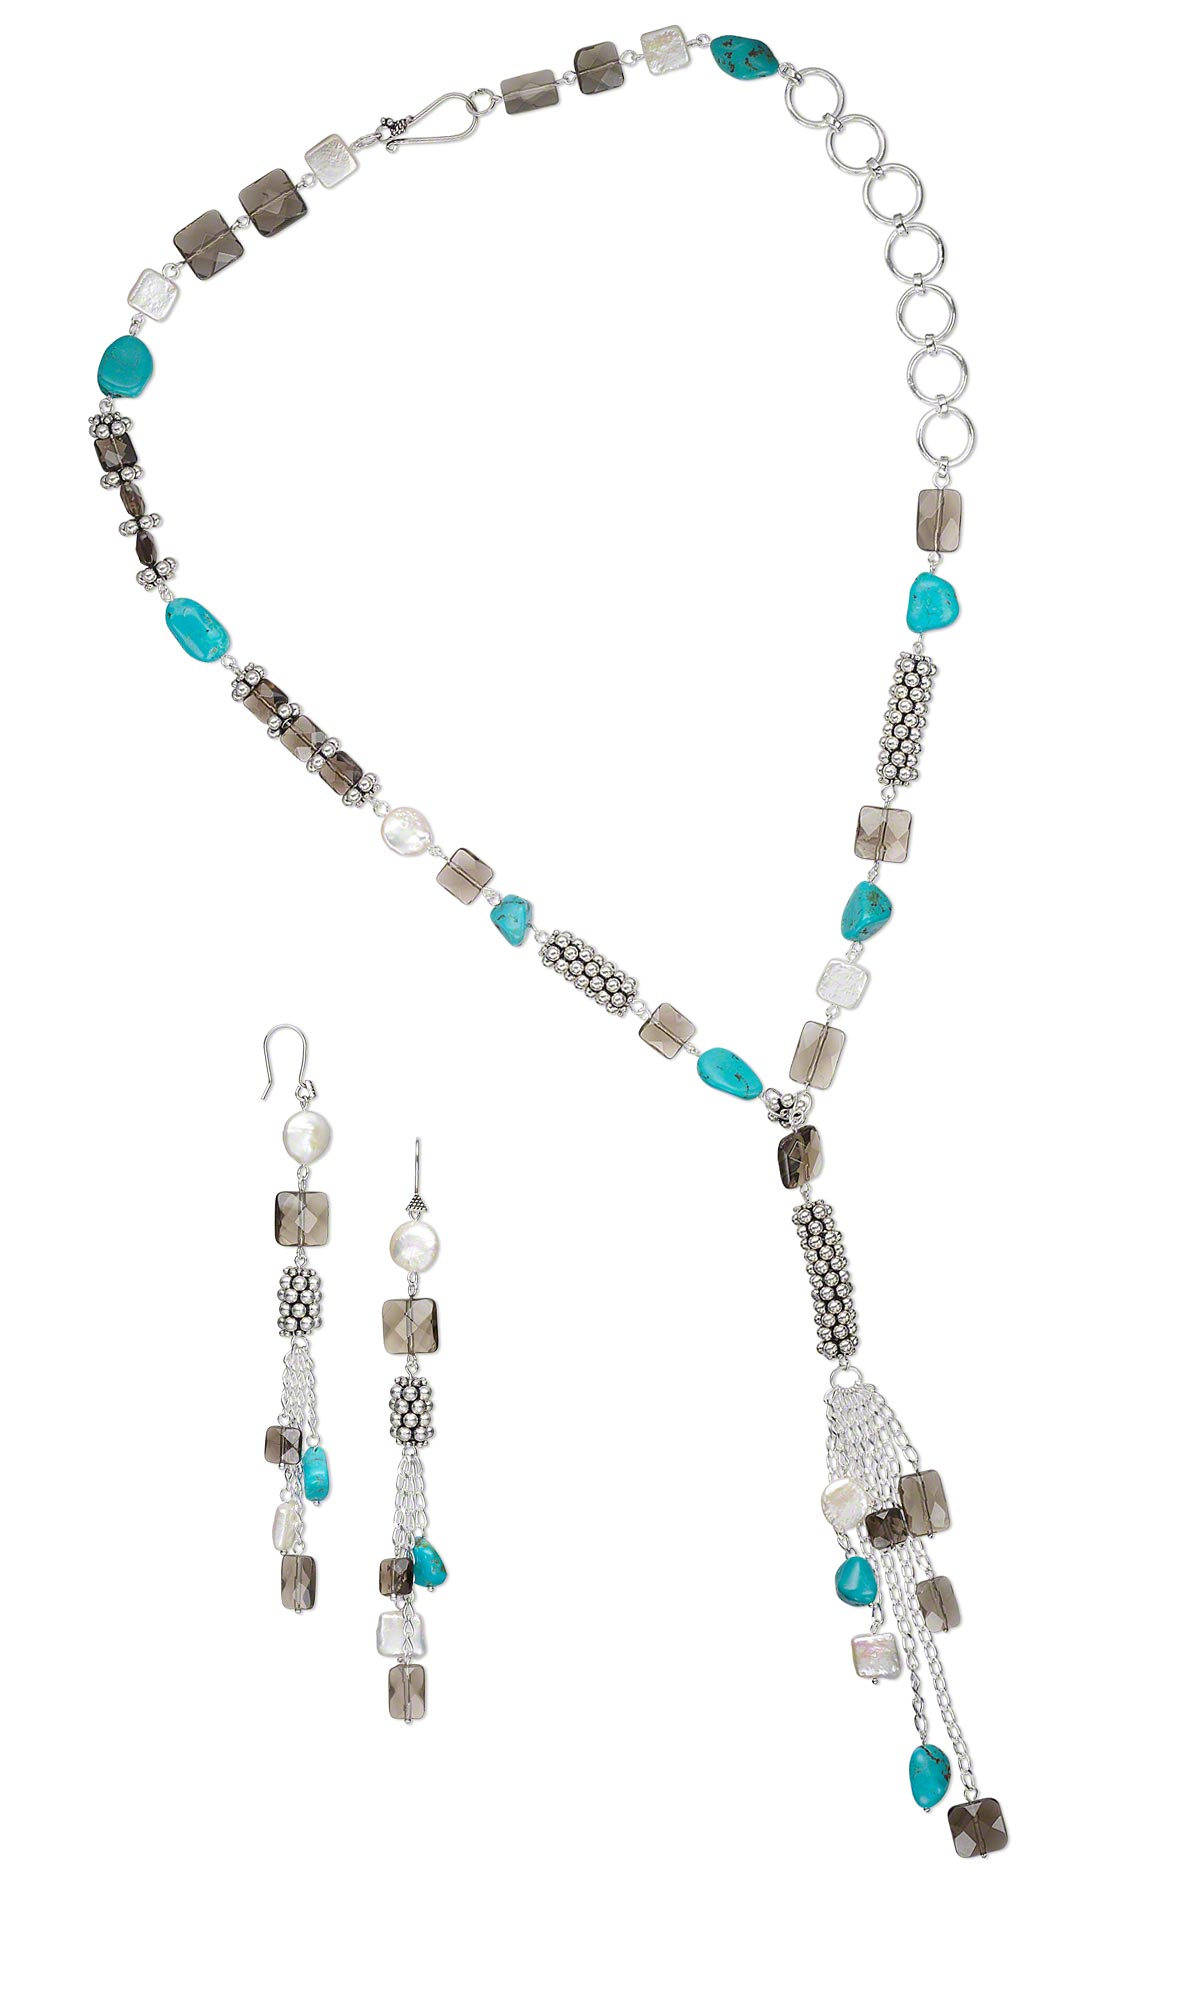 Jewelry Design - Single-Strand Necklace and Earring Set with Smoky ...